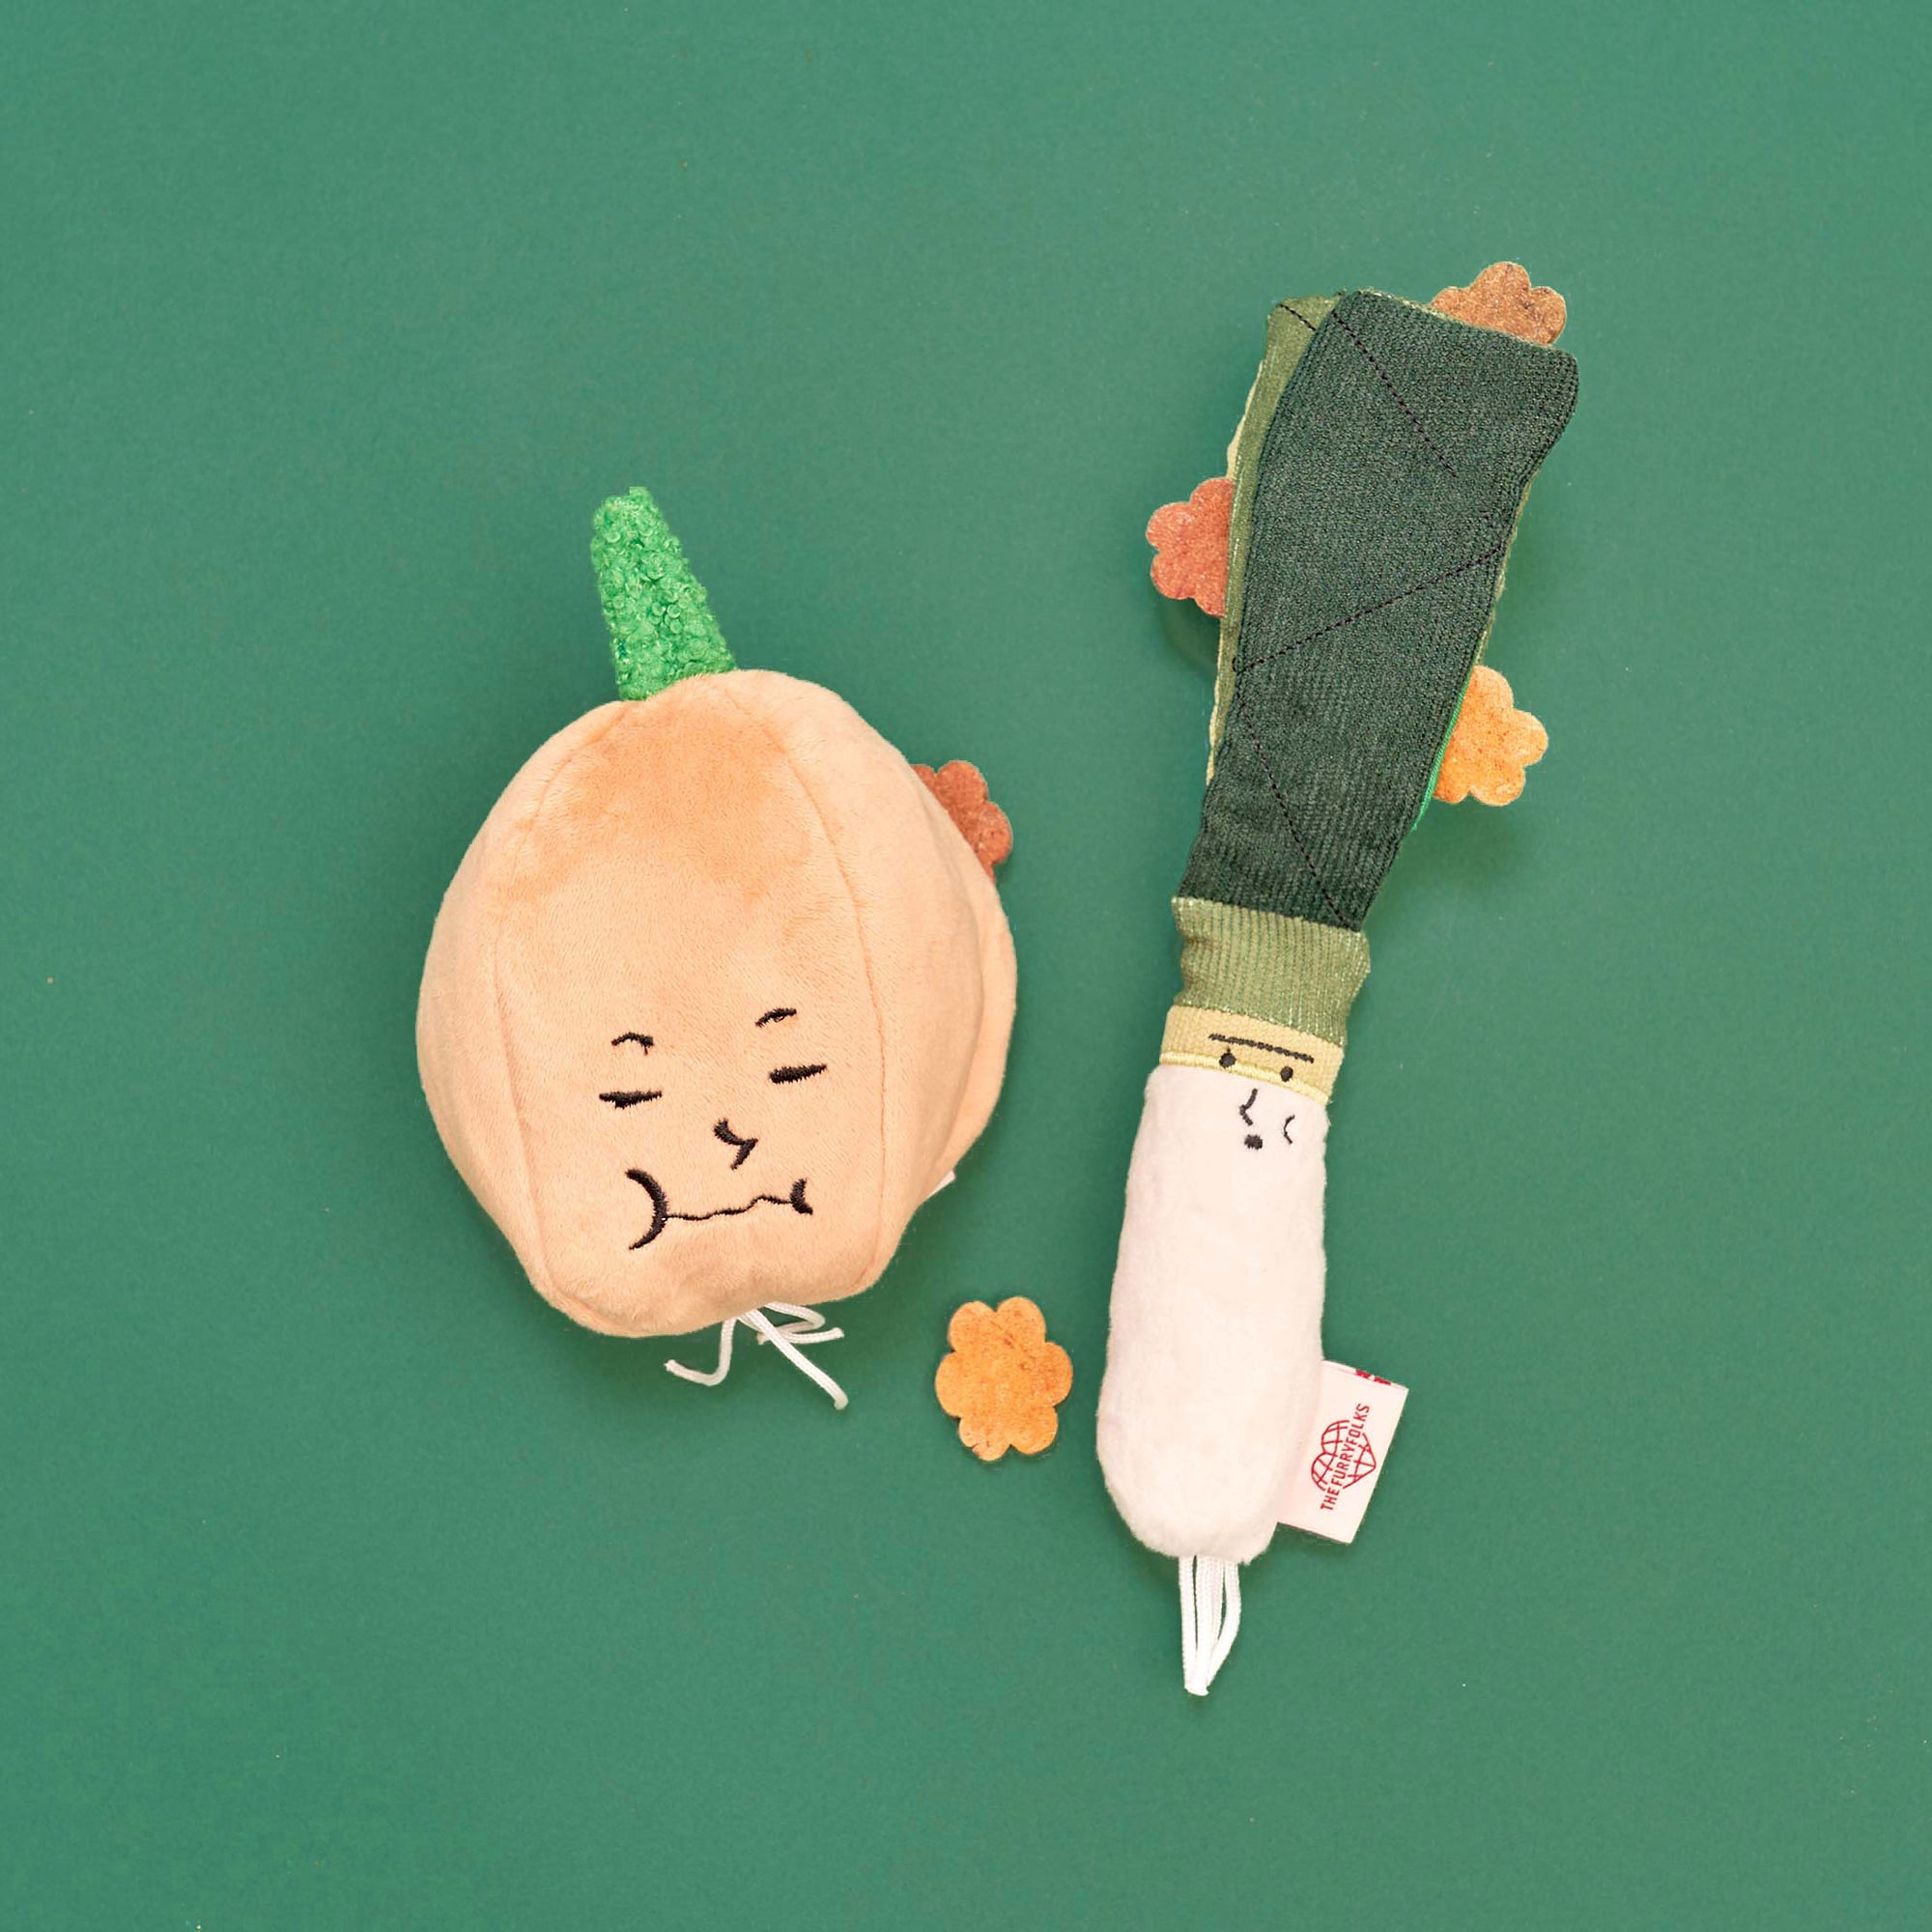 two plush dog toys, one shaped like a yellow onion with a happy face and green top, and another resembling a green onion with a content face and dark green leaves. Both are laid out on a green background with a few dog treats scattered around, indicating their function as interactive nosework toys that can be stuffed with treats to encourage a dog’s natural foraging behavior. The setup is simple yet visually engaging, highlighting the toys' features and potential for pet entertainment.